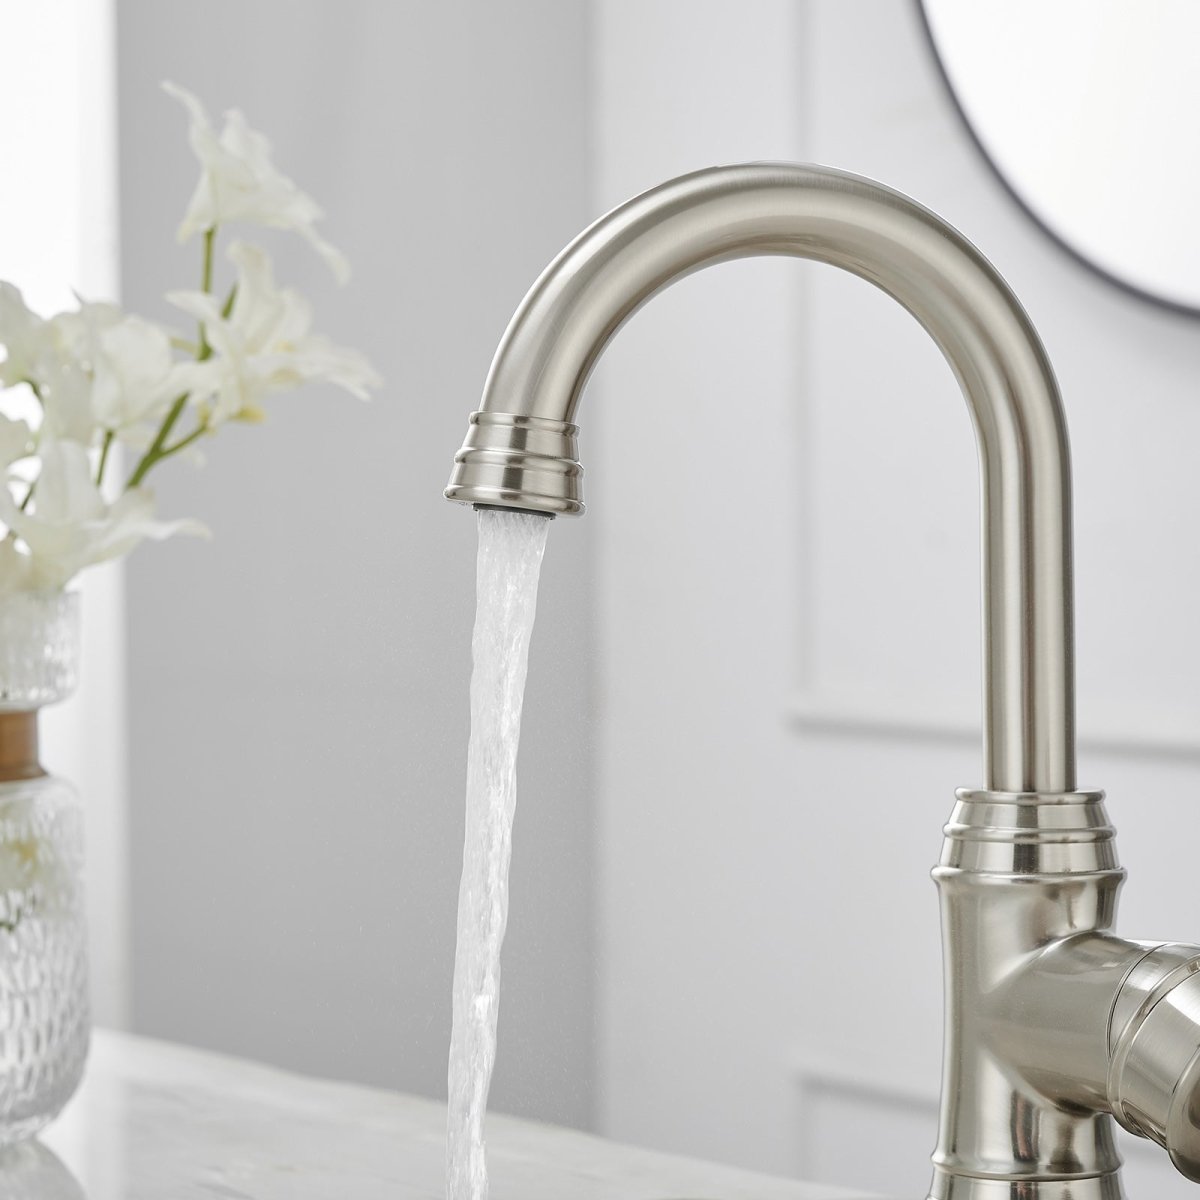 Single Hole Bathroom Faucet with Swivel Spout Brushed Nickel - buyfaucet.com